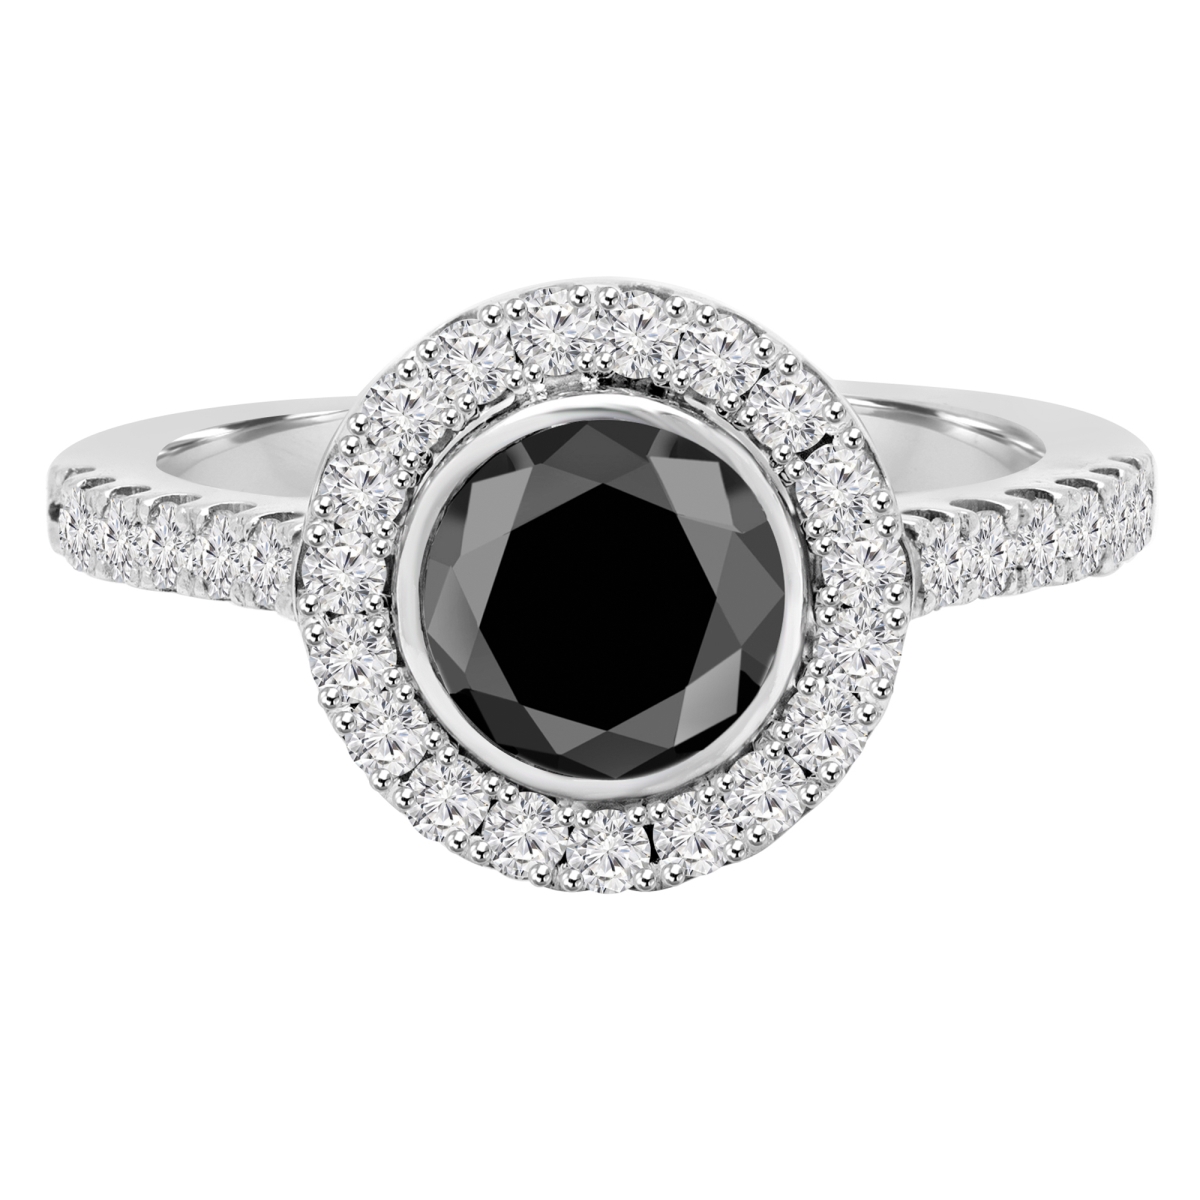 MD190288-6 2 CTW Round Black Diamond Bezel Set Halo Engagement Ring in 14K White Gold with Accents - Size 6 -  Majesty Diamonds